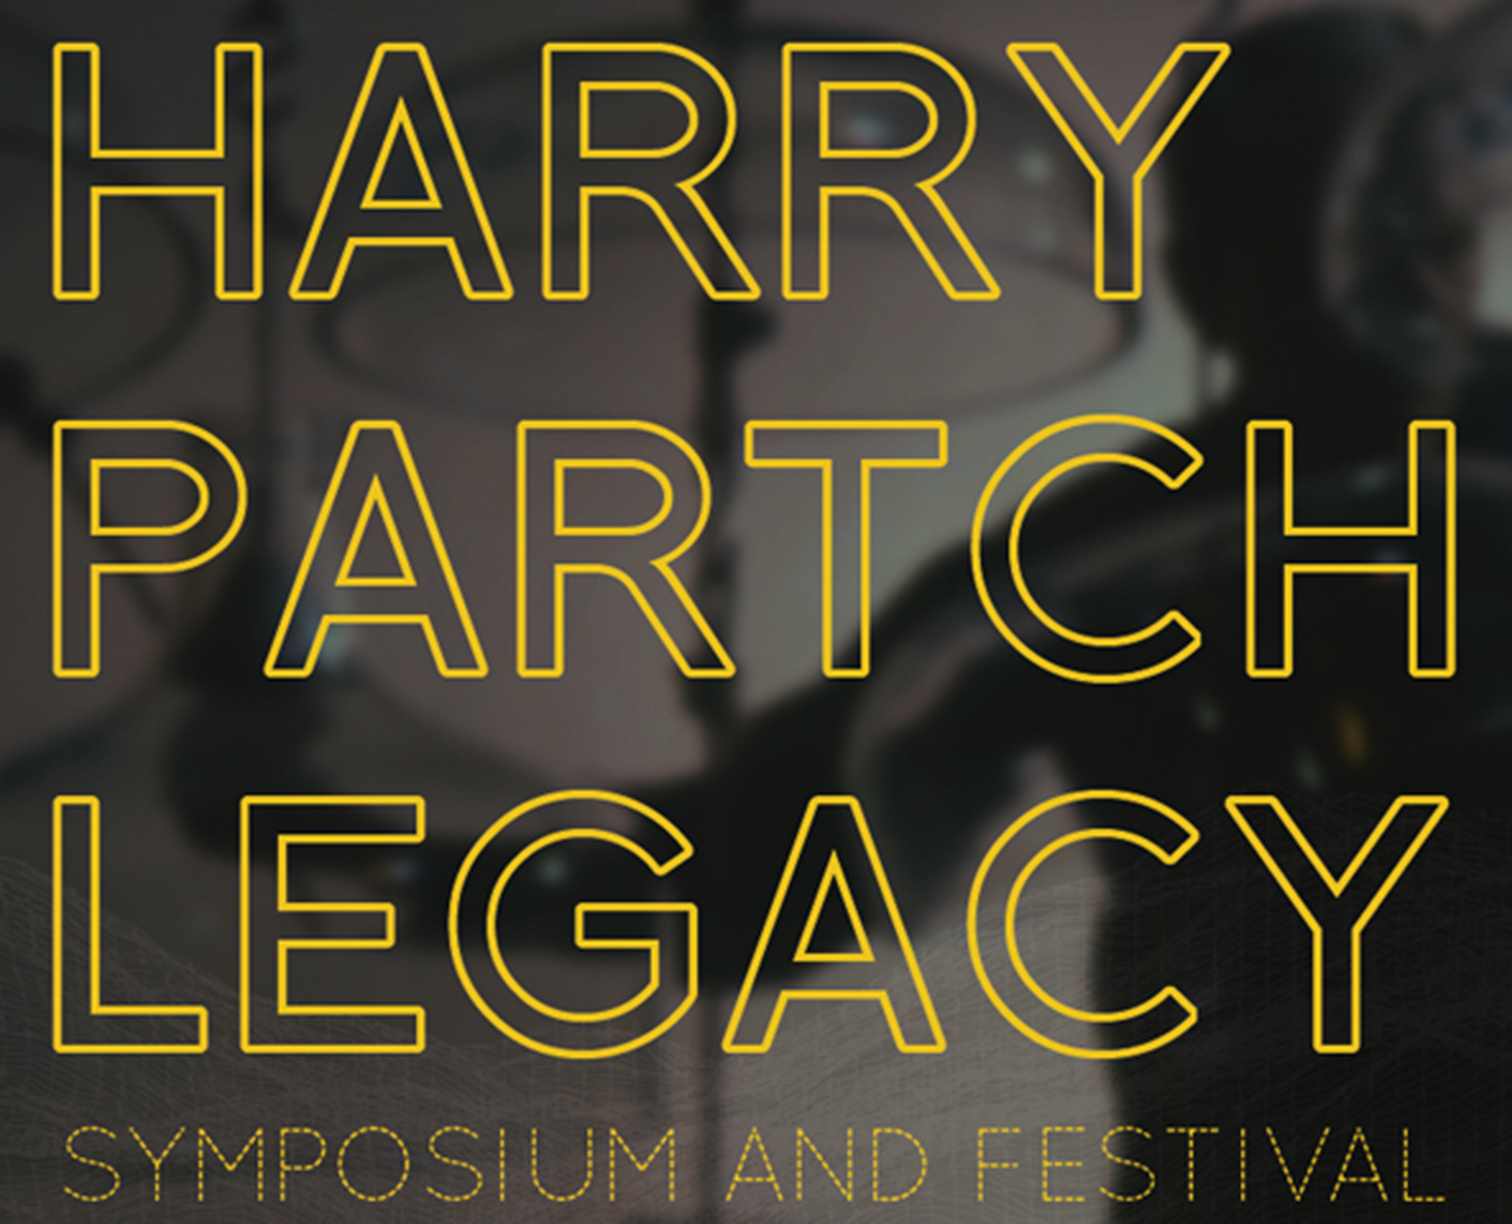 Harry Partch Legacy